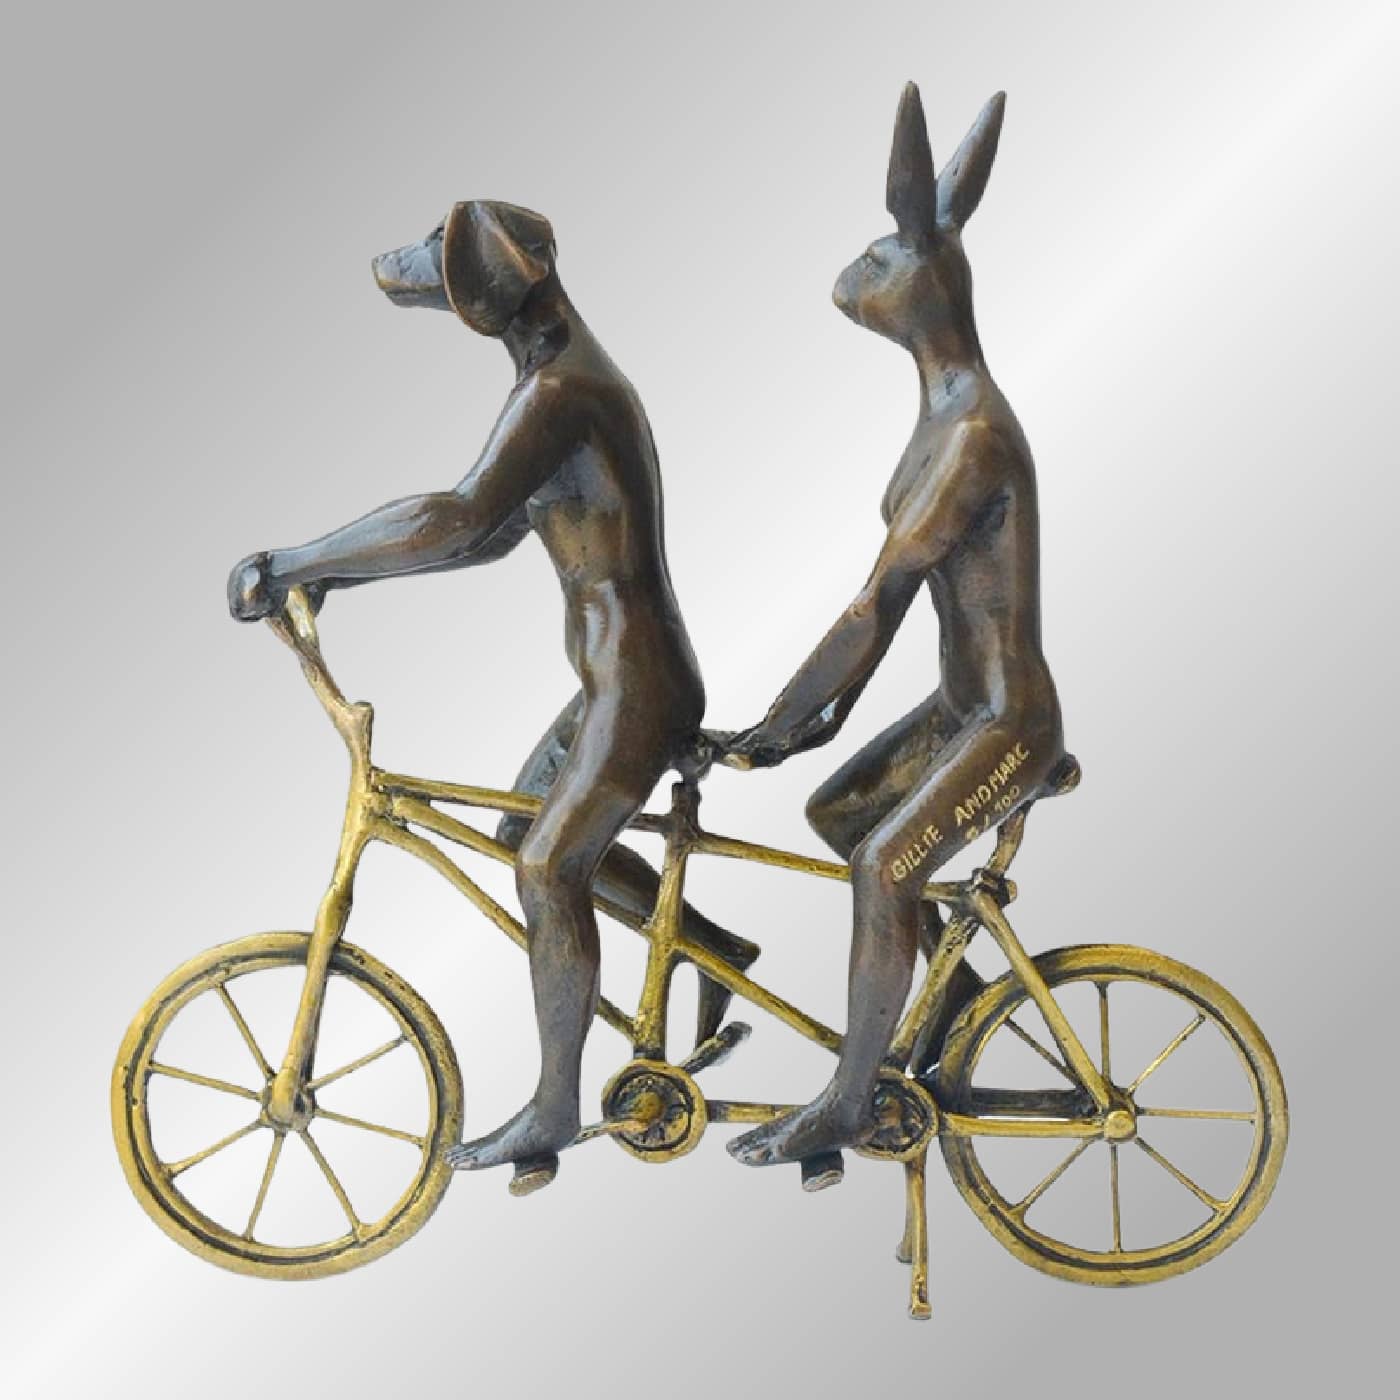 Gillie and Marc Bronze Sculpture ~ 'They Loved Riding Together in Paris' (Gold) - Curate Art & Design Gallery Sorrento Mornington Peninsula Melbourne